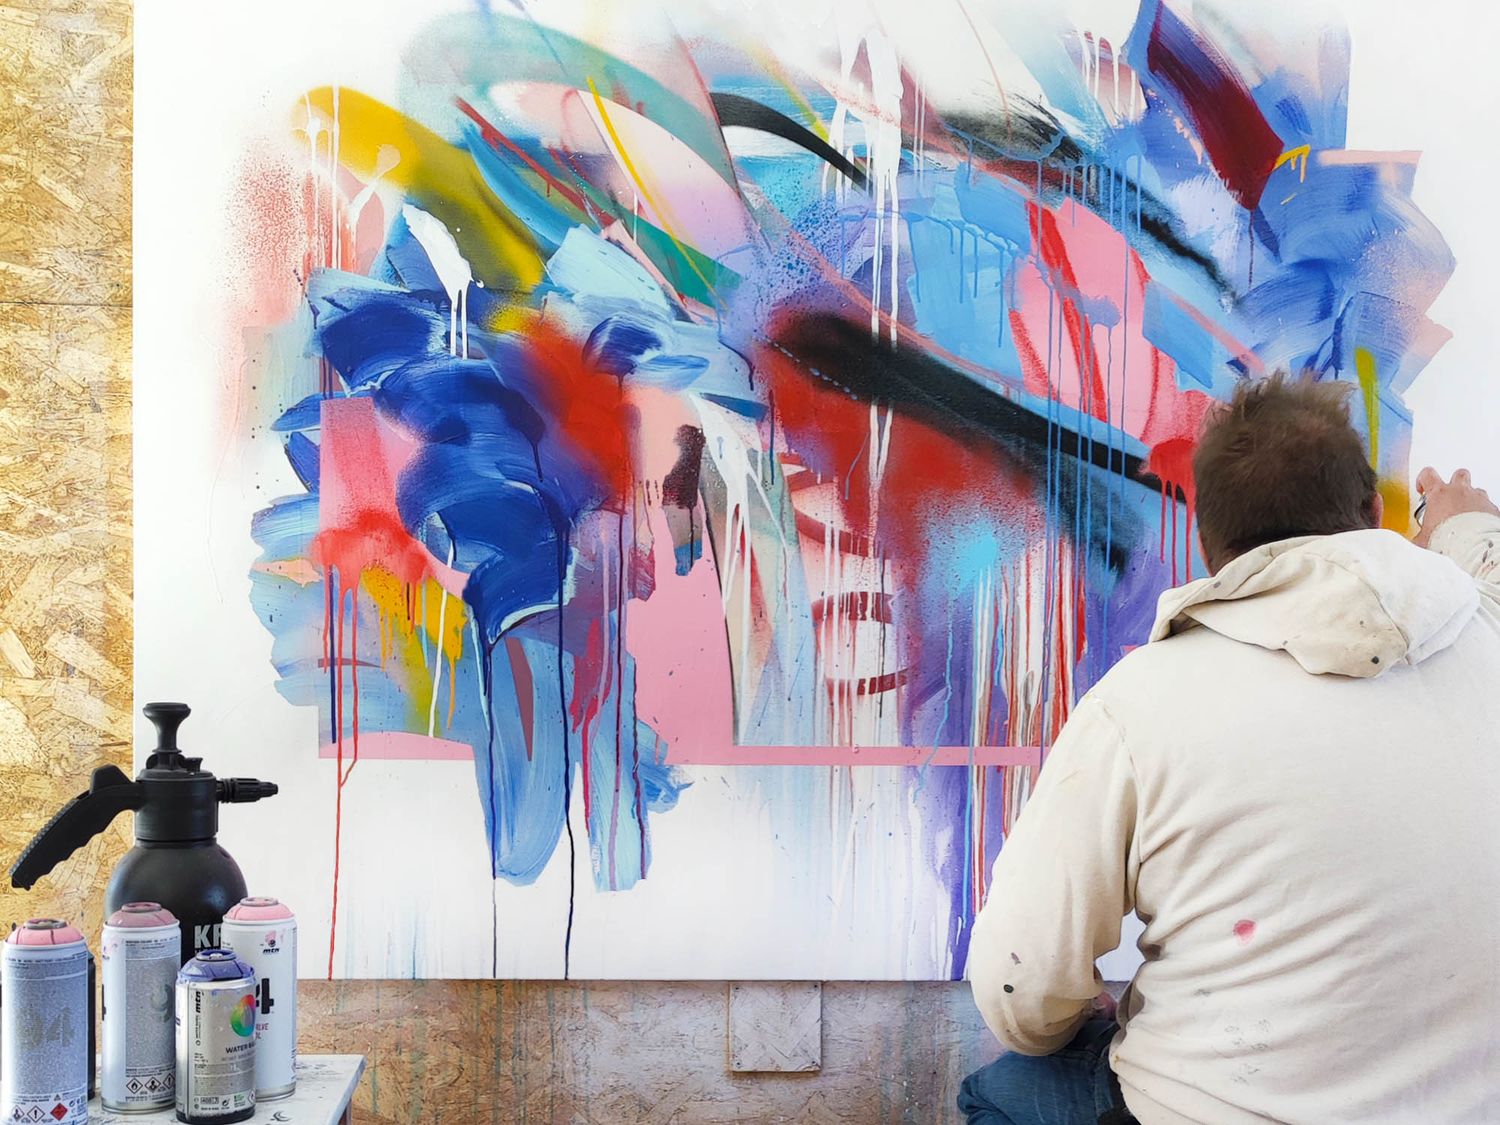 When he works into his studio, Emanuele Vittorioso is used to combining spray cans, mini sprayers and different types of brushes, always pushing the boundaries of his technique with pure energy.